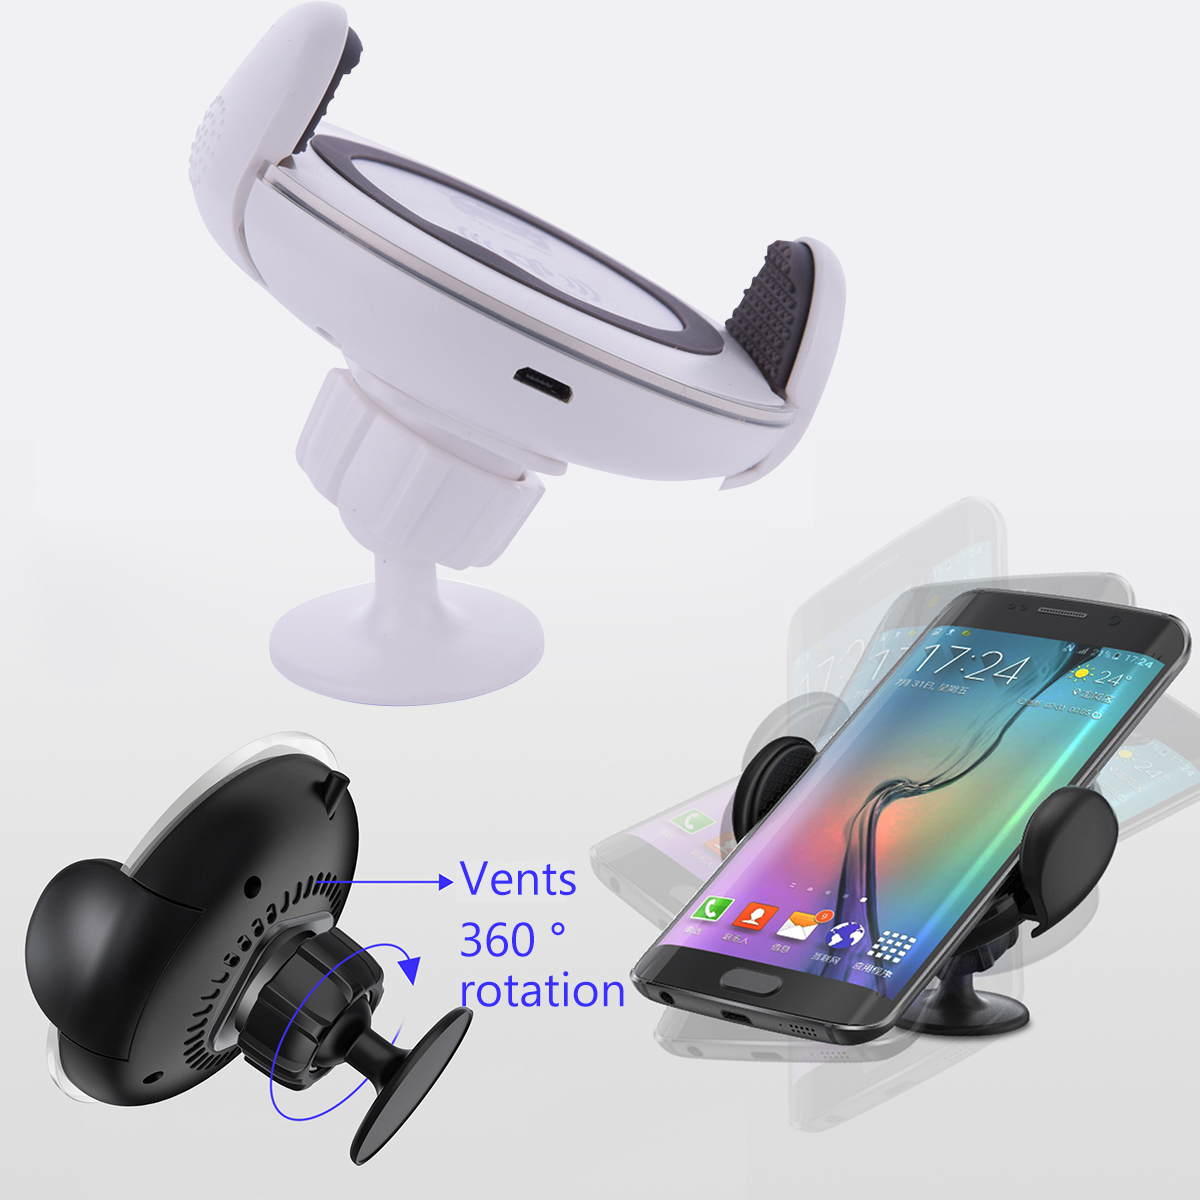 360-Degree-Wireless-Car-Mount-Charger-Dock-Air-Vent-Mount-Holder-for-iPhone-8-Plus-X-1206374-2